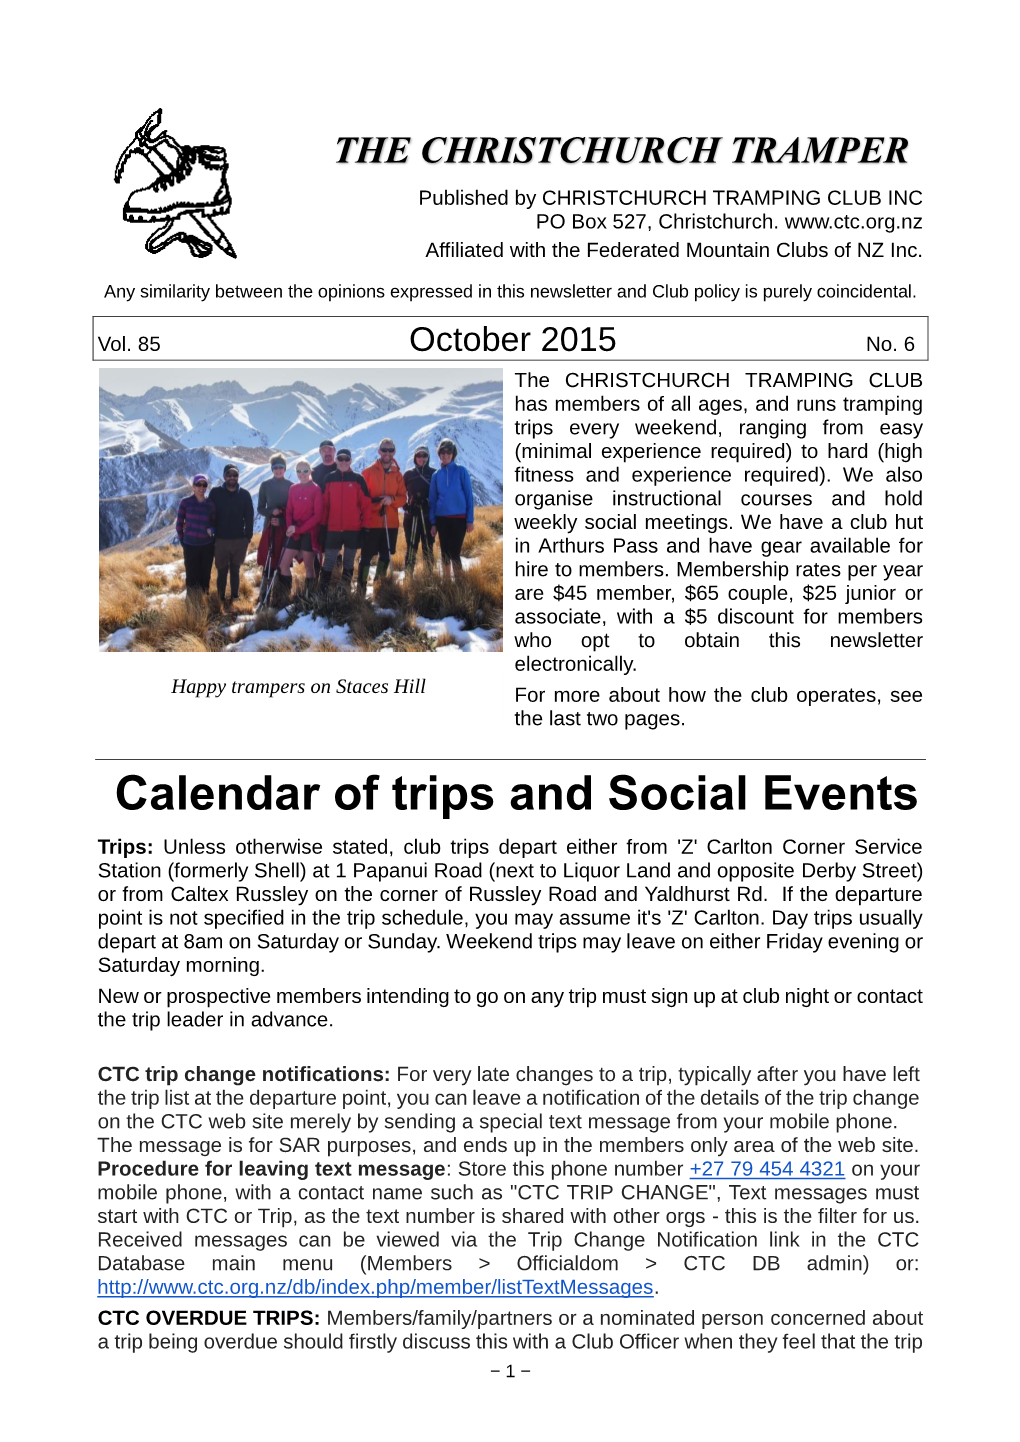 Calendar of Trips and Social Events